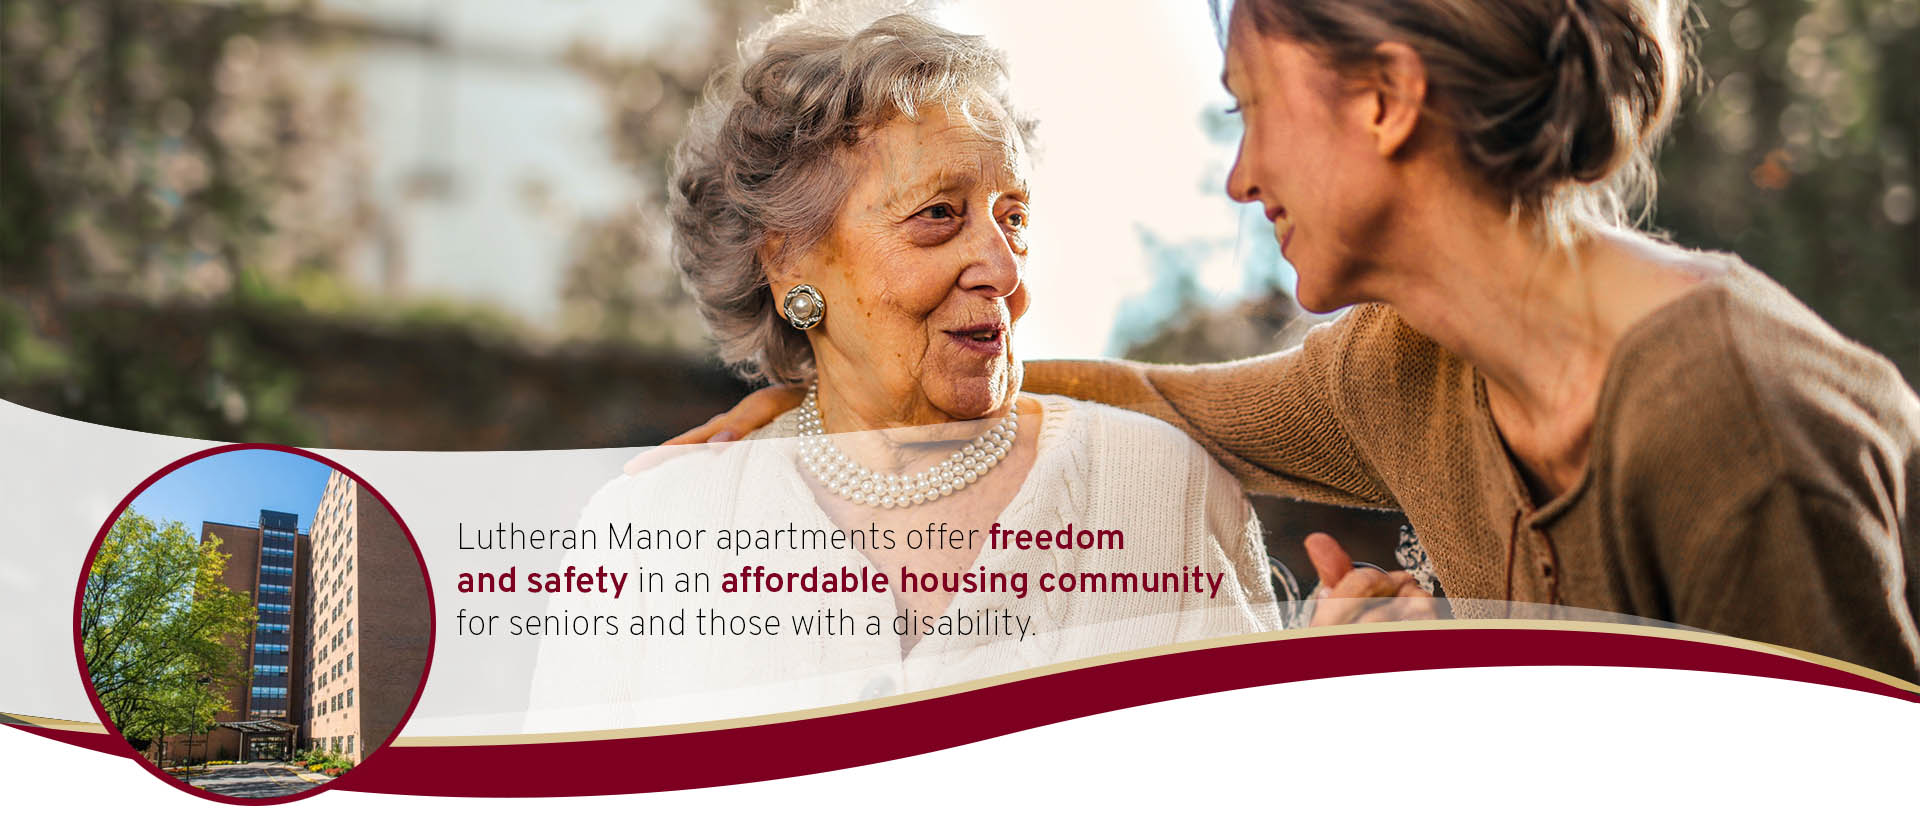 Lutheran manor apartments offer freedom and safety in affordable housing community.